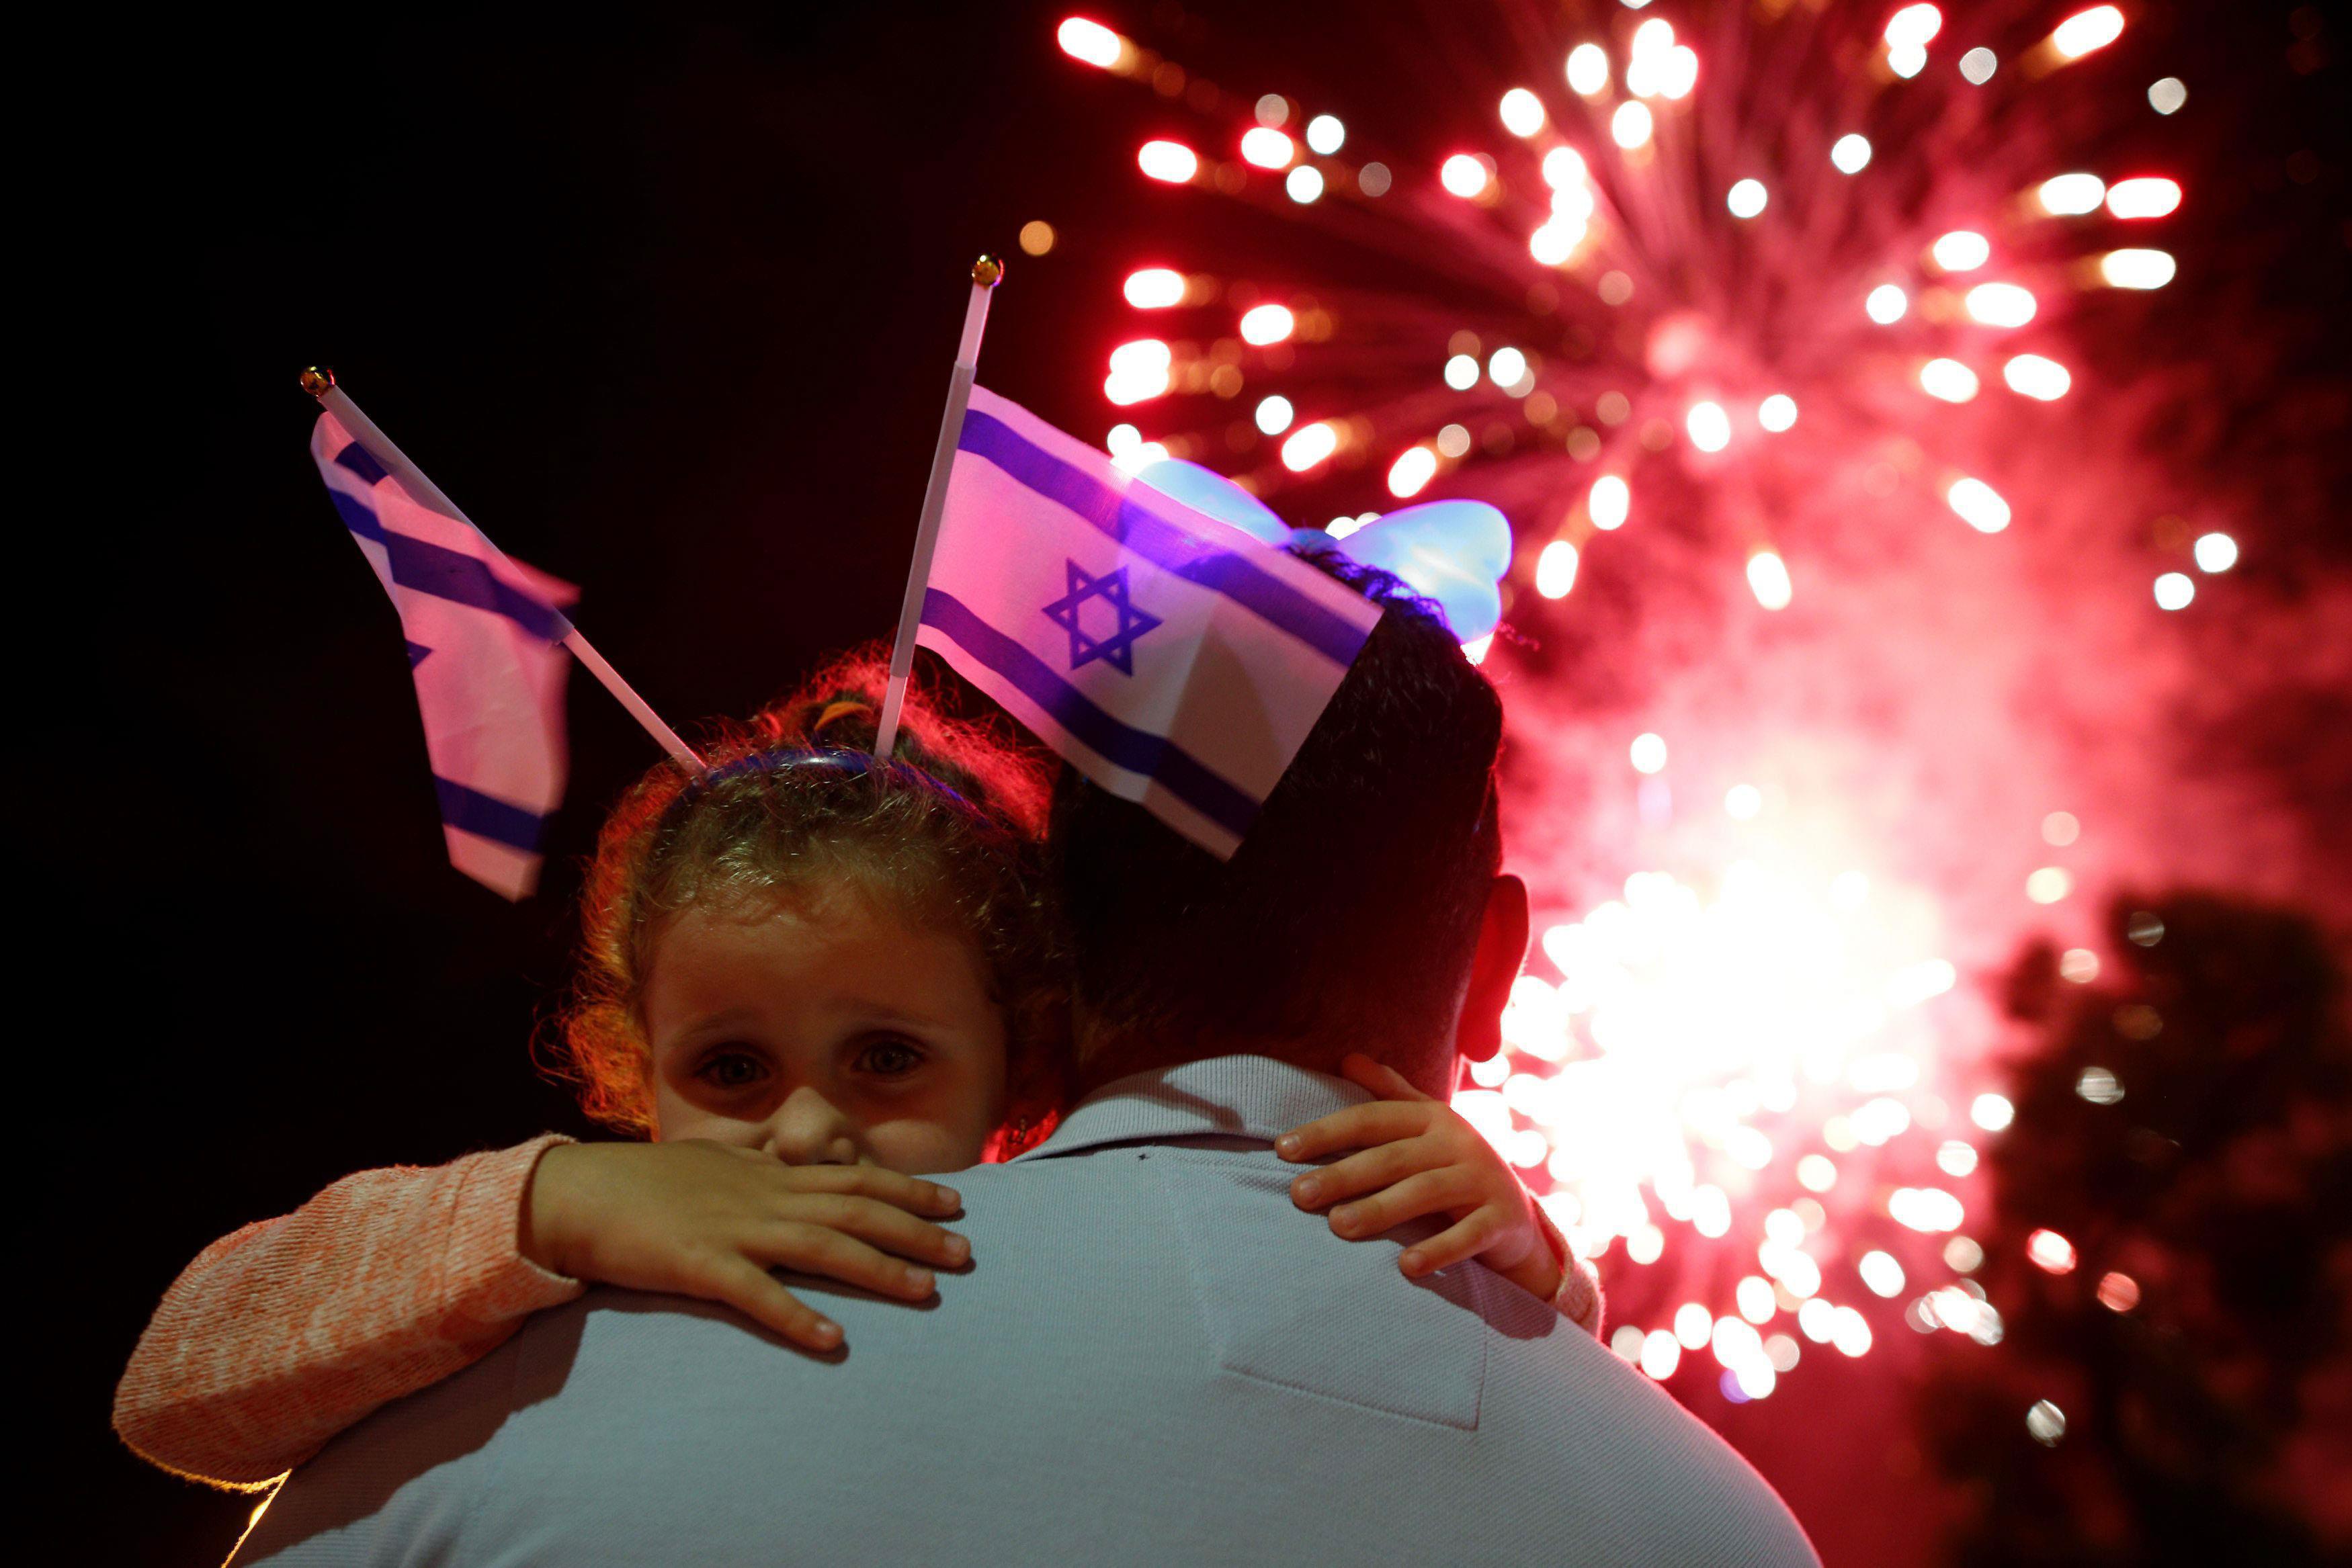 Israelis watch a fireworks show during celebrations marking Israel's 68th Independence Day in the so